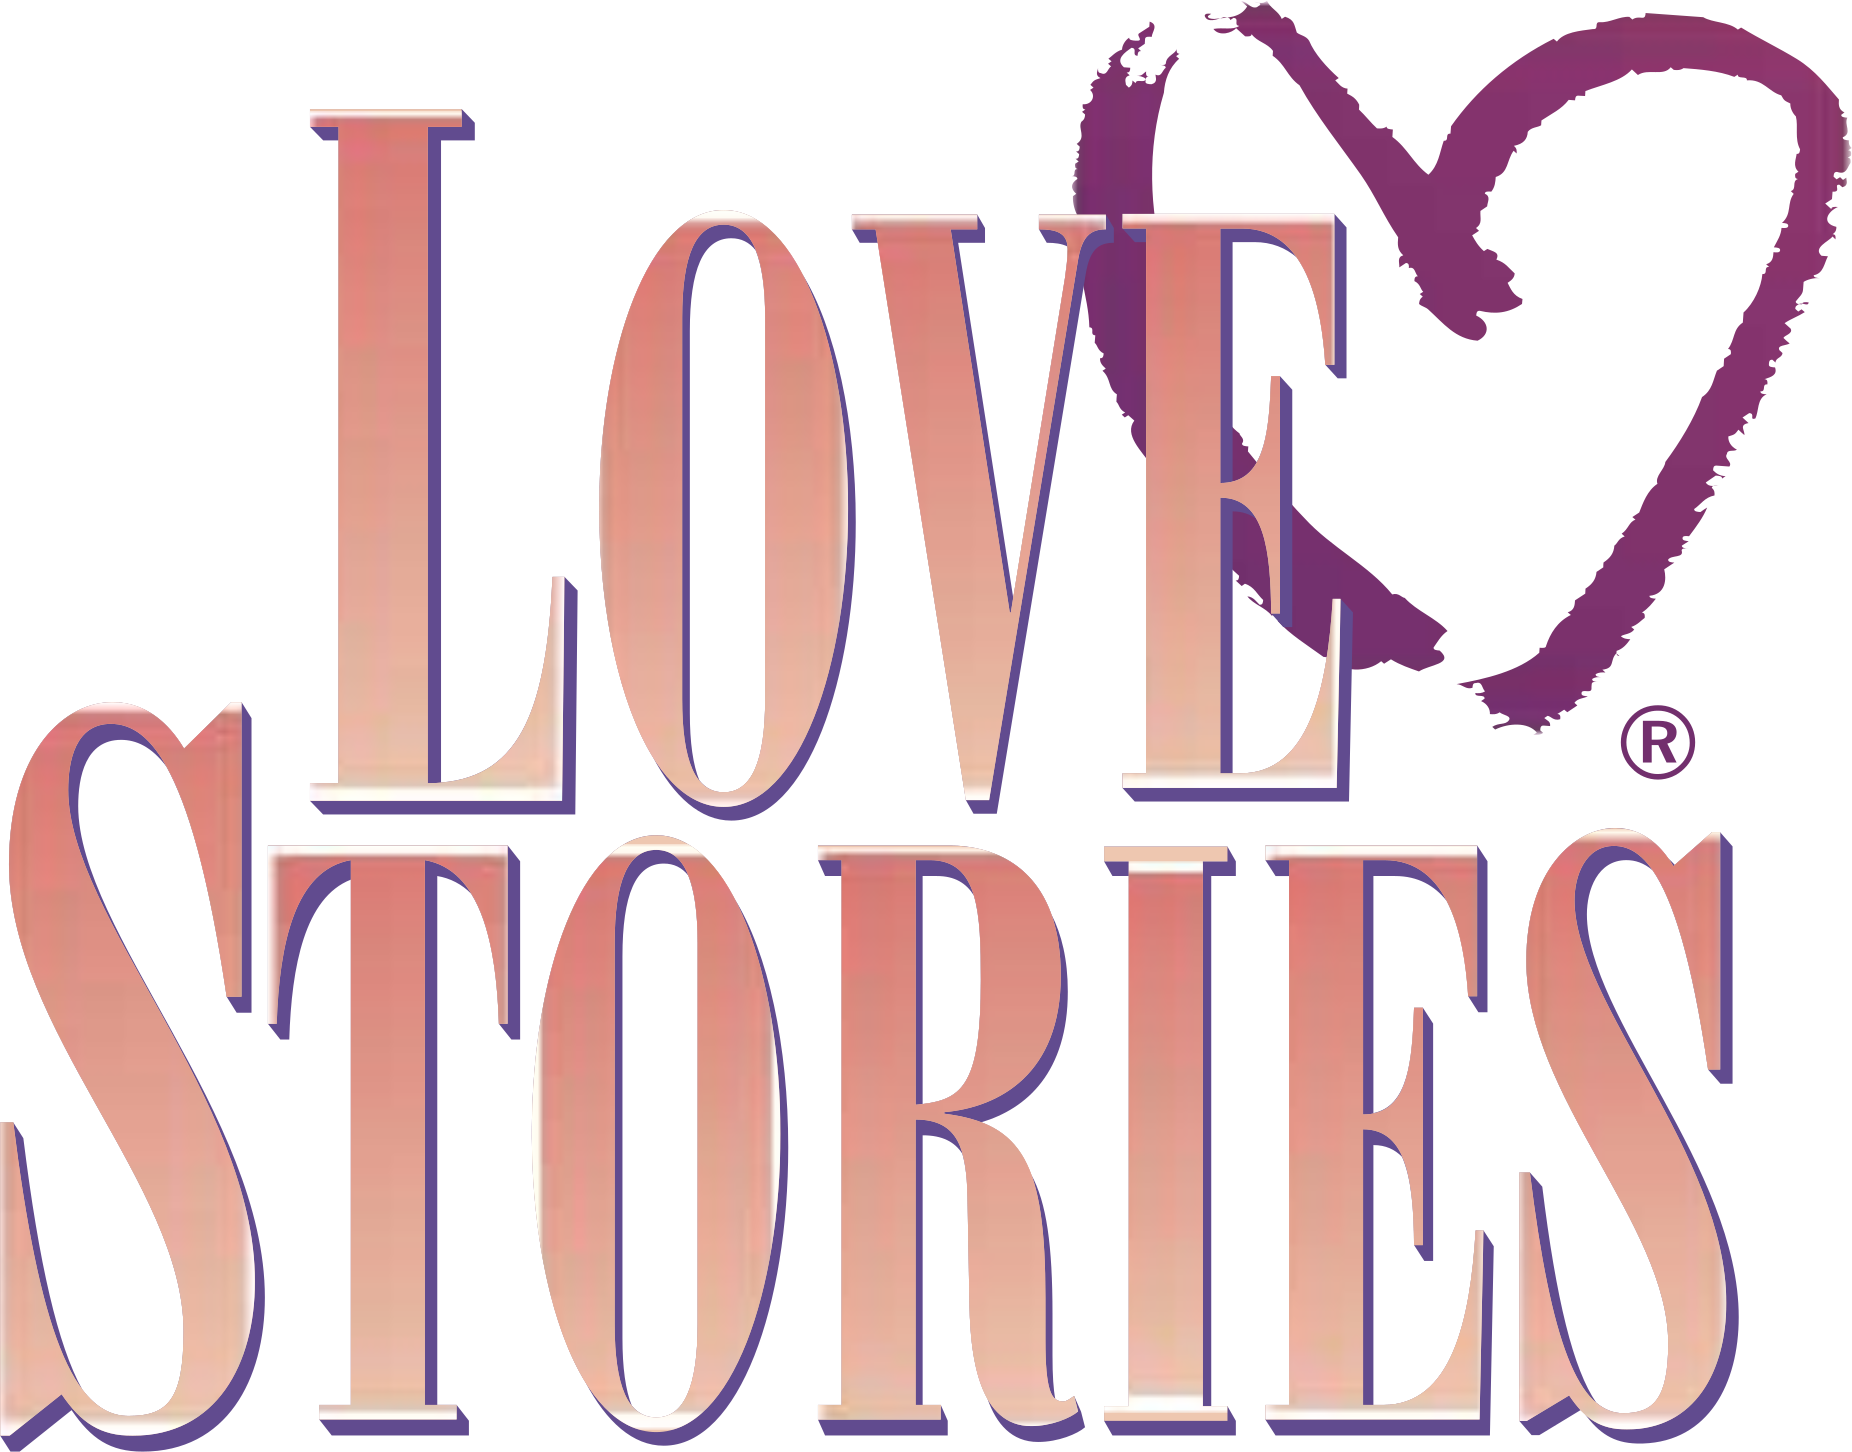 Encore Movie Network: The Love Stories Channel